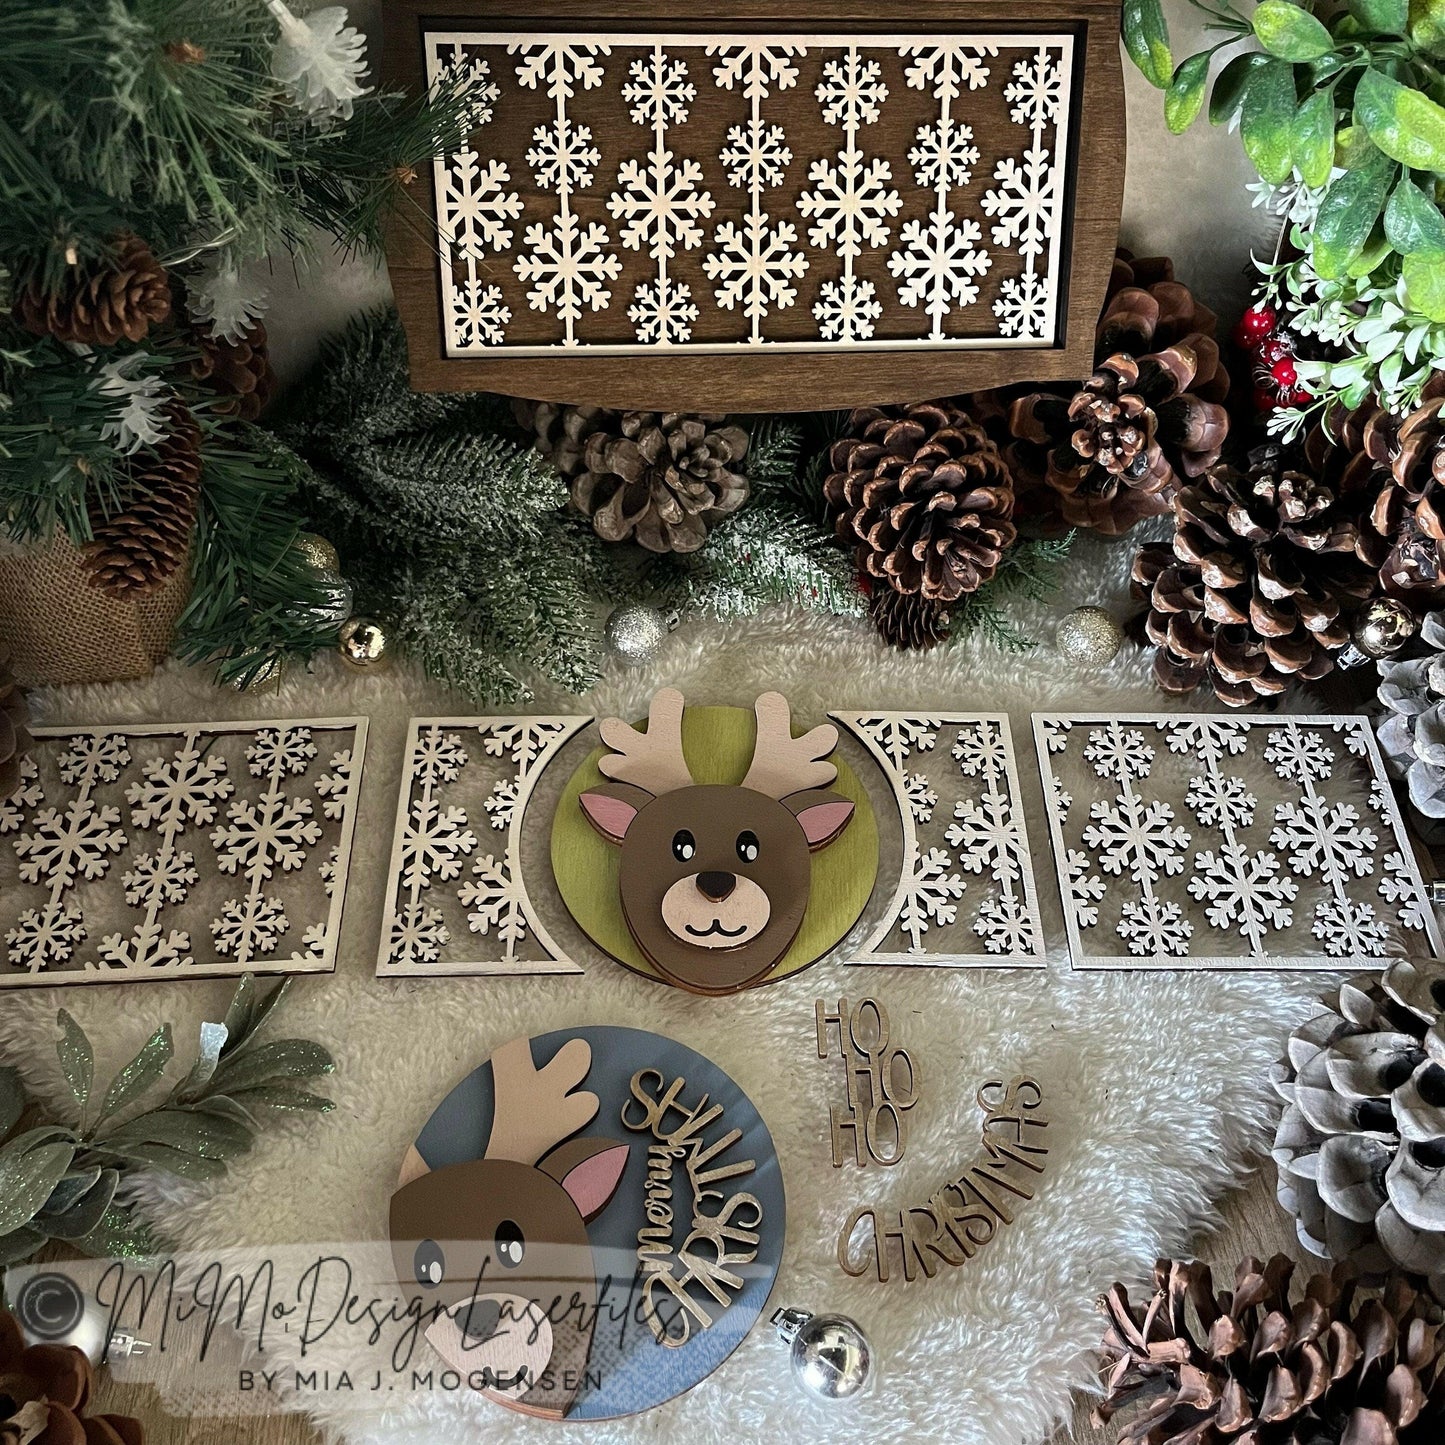 ADD ON 3D Reindeer with Snowflake pattern sides and text for MiMoDesignLaserfiles' Interchangeable Baskets